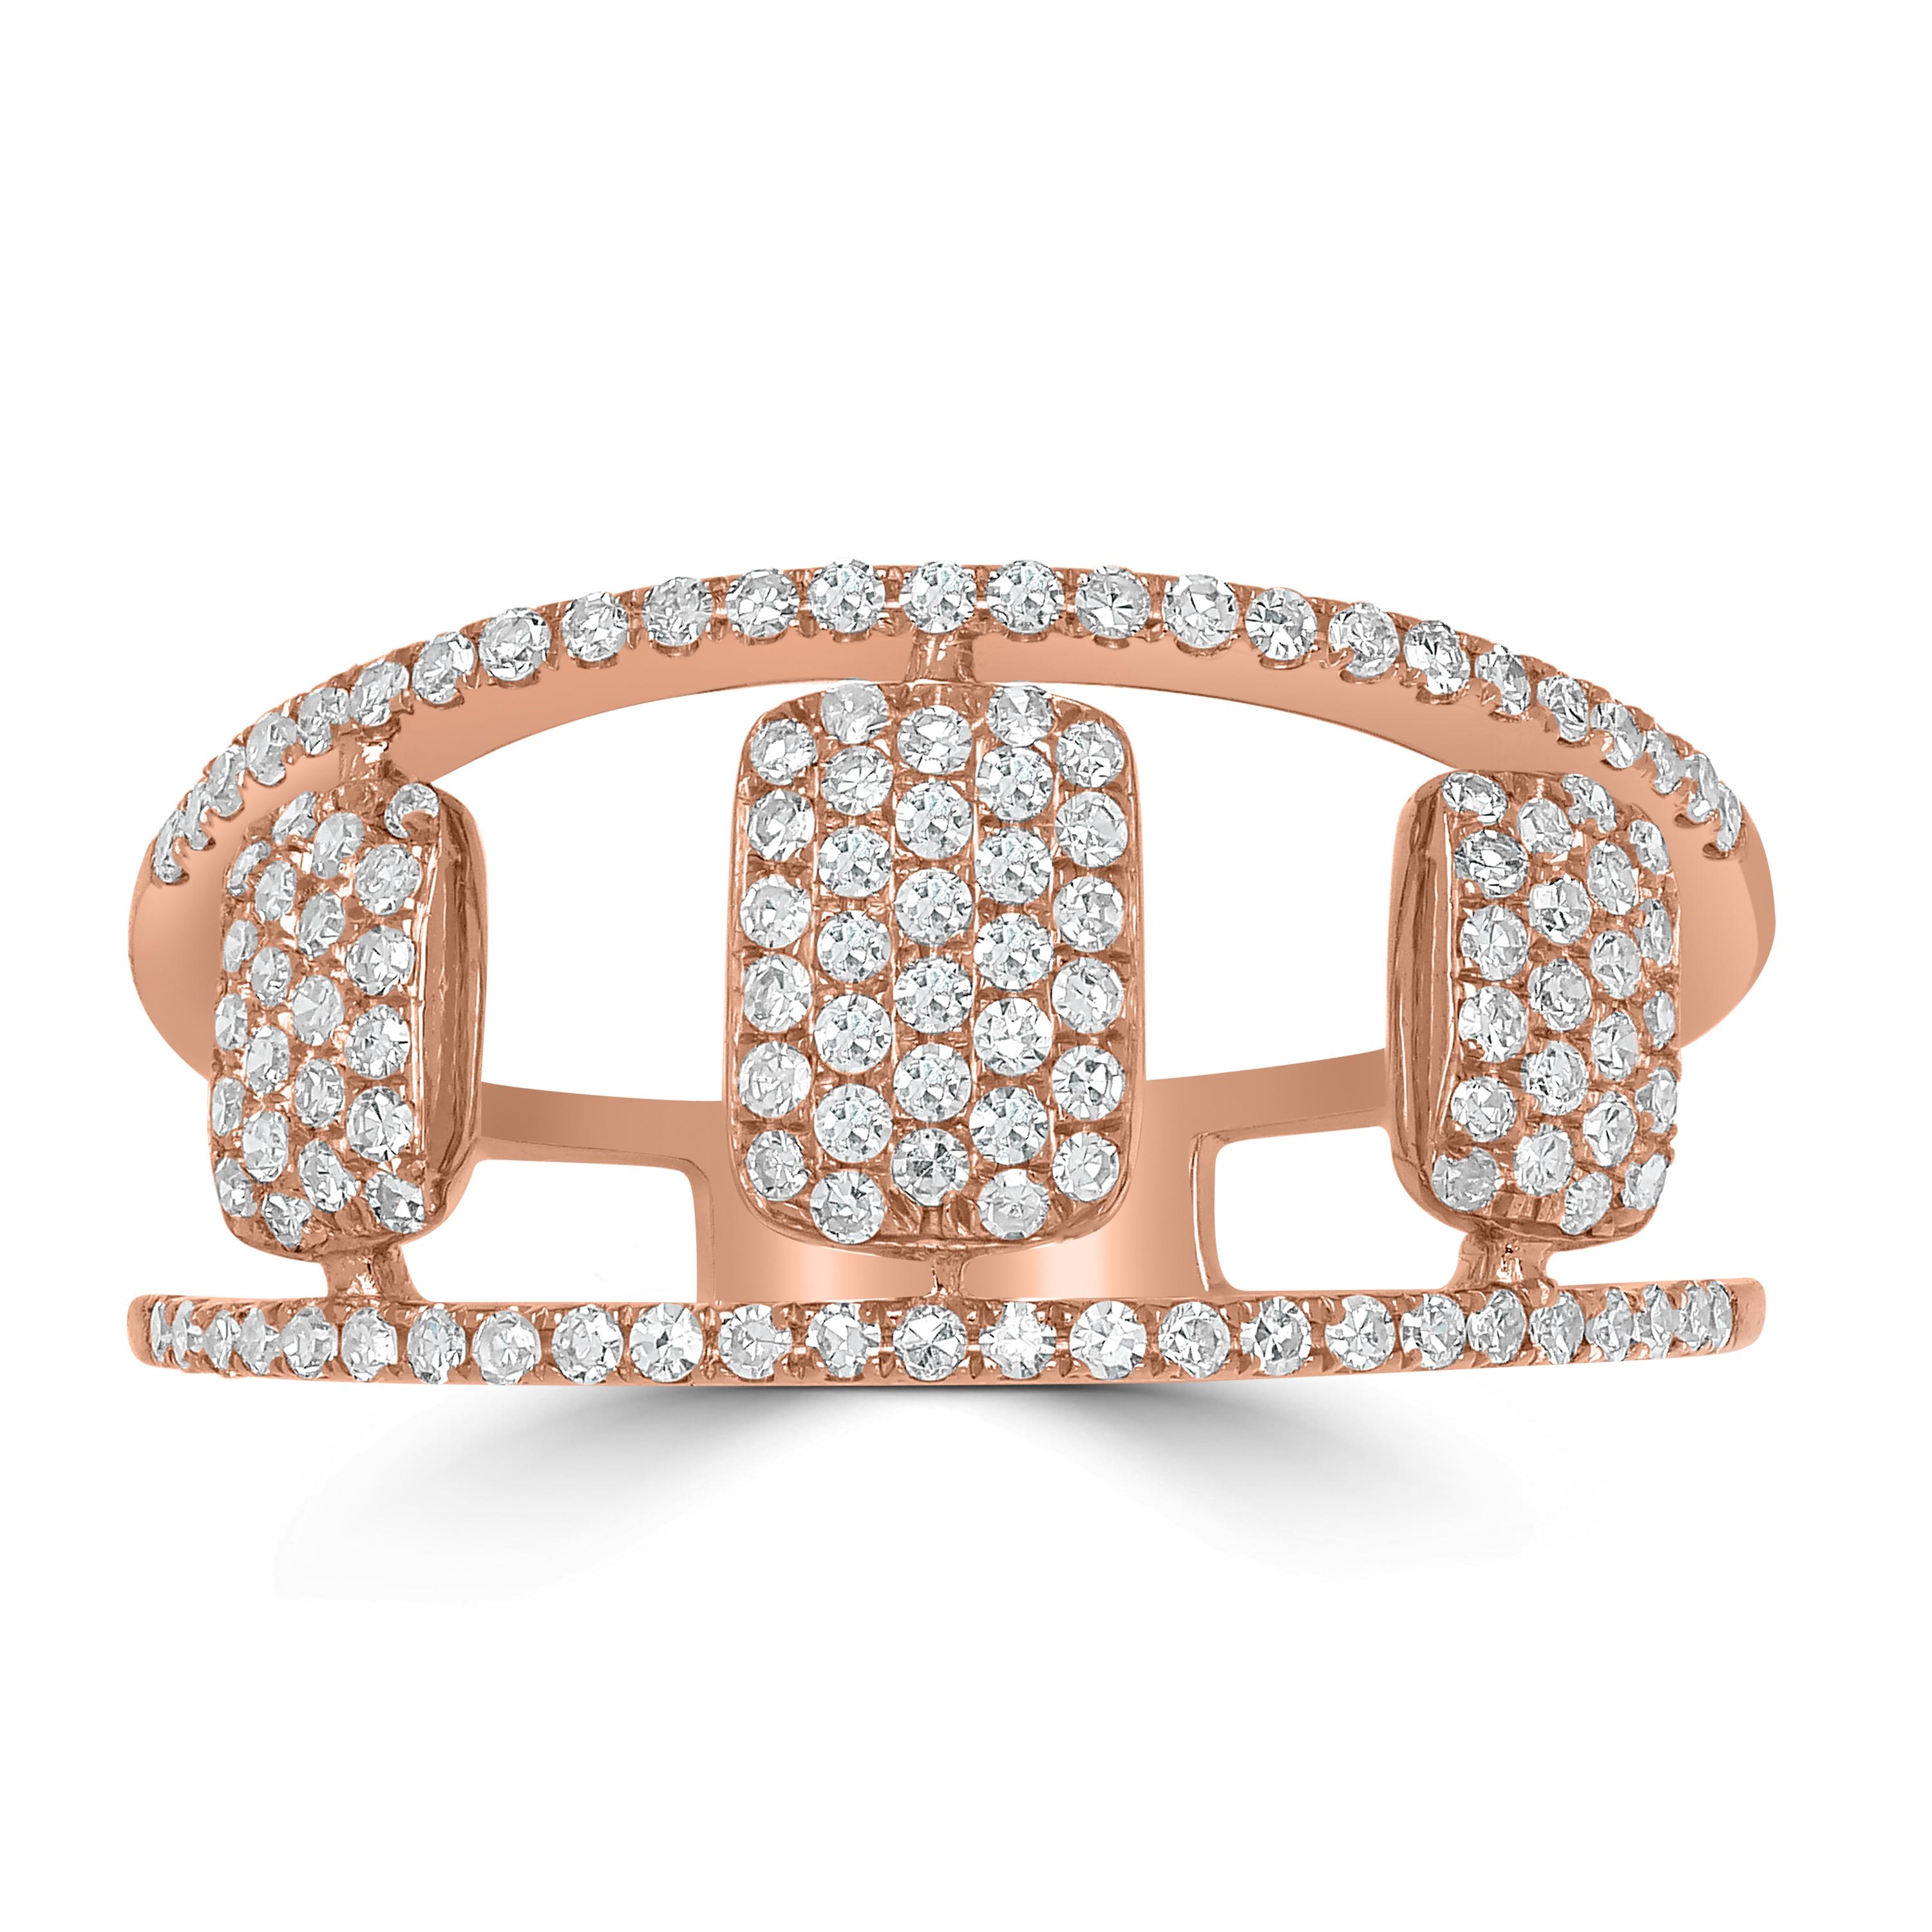 Glamorously attractive, this Luxle split-shank ring in 14K rose gold is featured with rectangle-shaped motifs embellished with diamonds. Each ring is made with 126 round diamonds set in micro pave.

Please follow the Luxury Jewels storefront to view